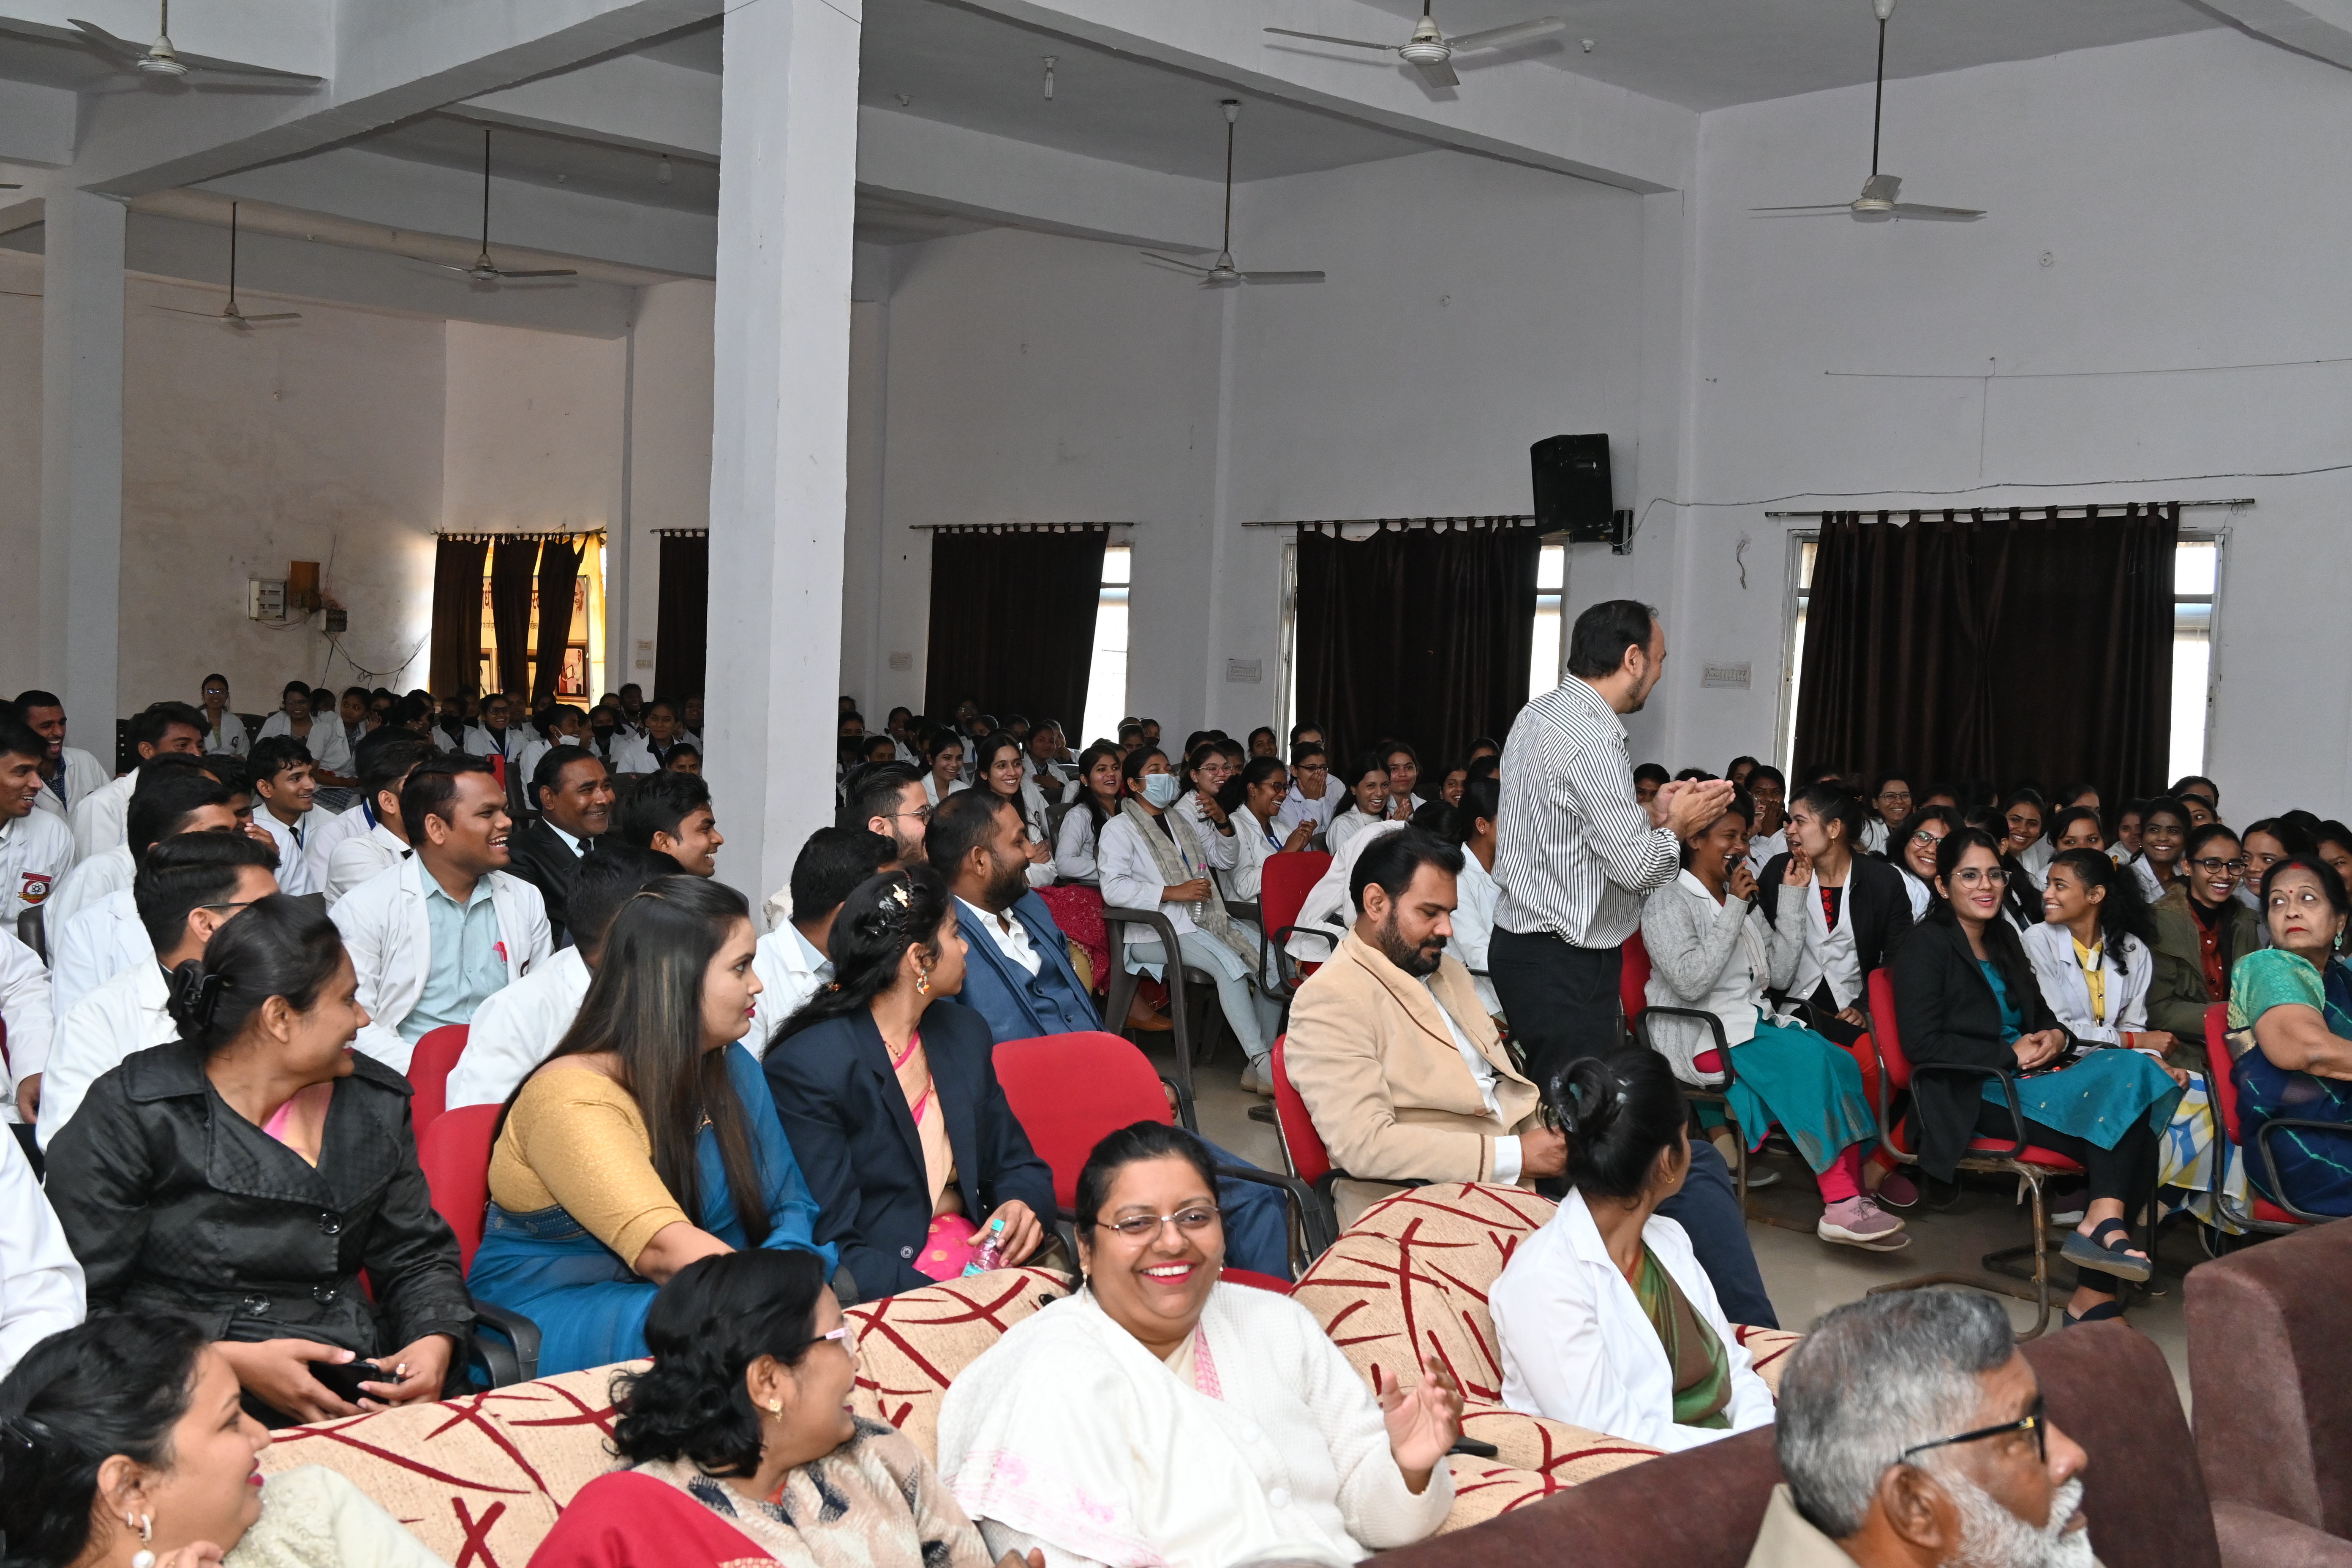 A Seminar being conducted at Mahatma Gandhi Homoeopathic College.